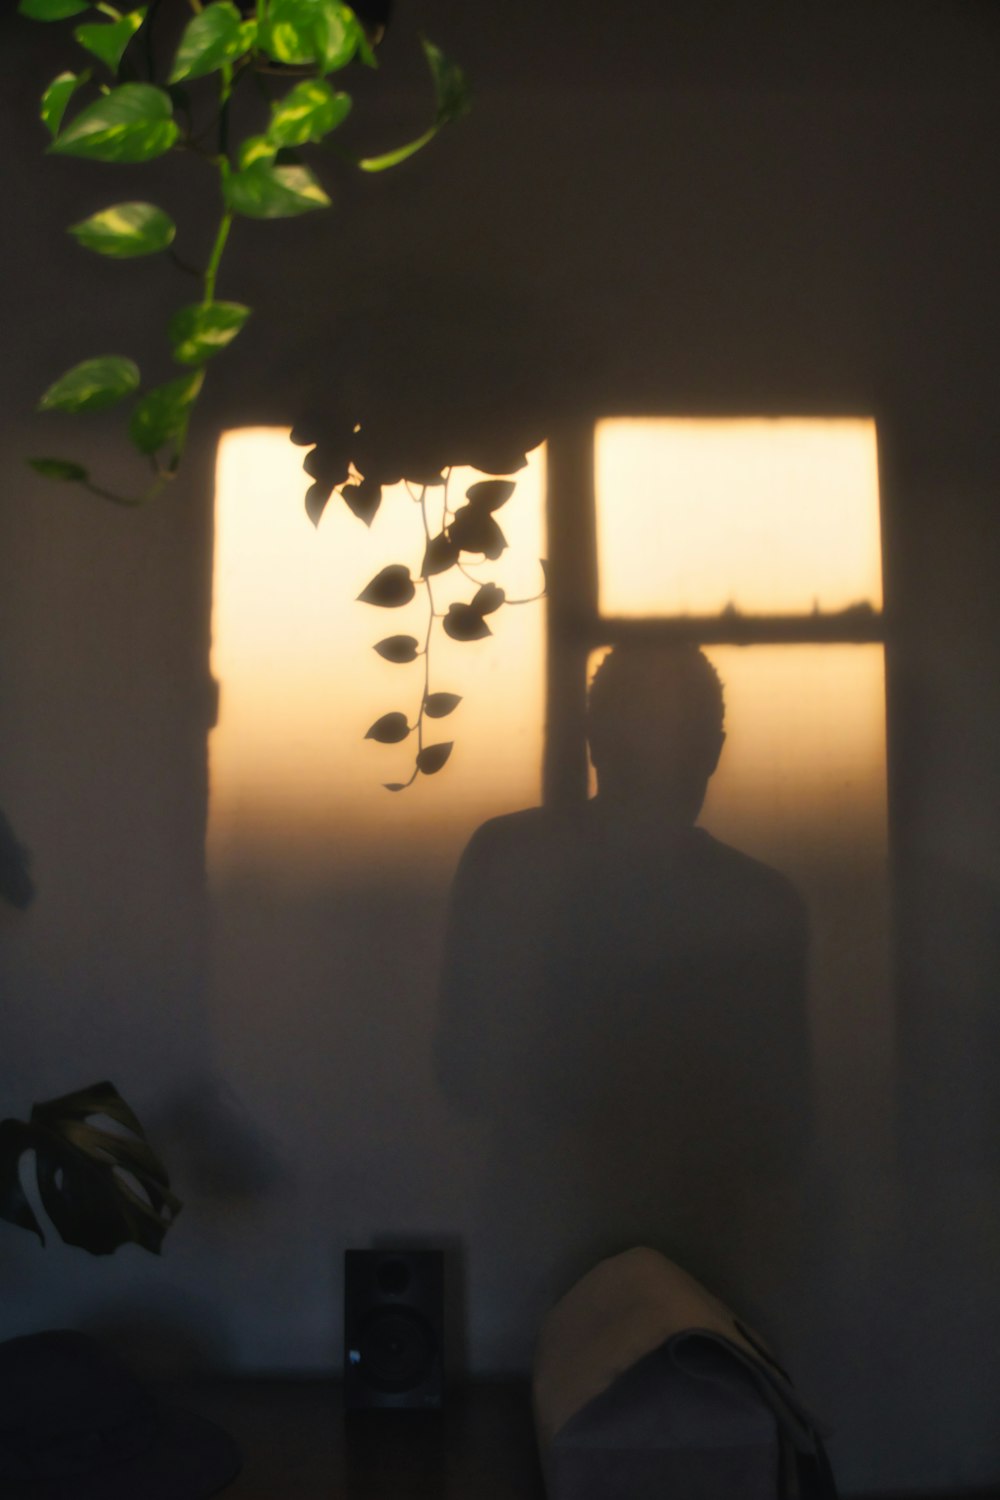 a person standing in front of a window